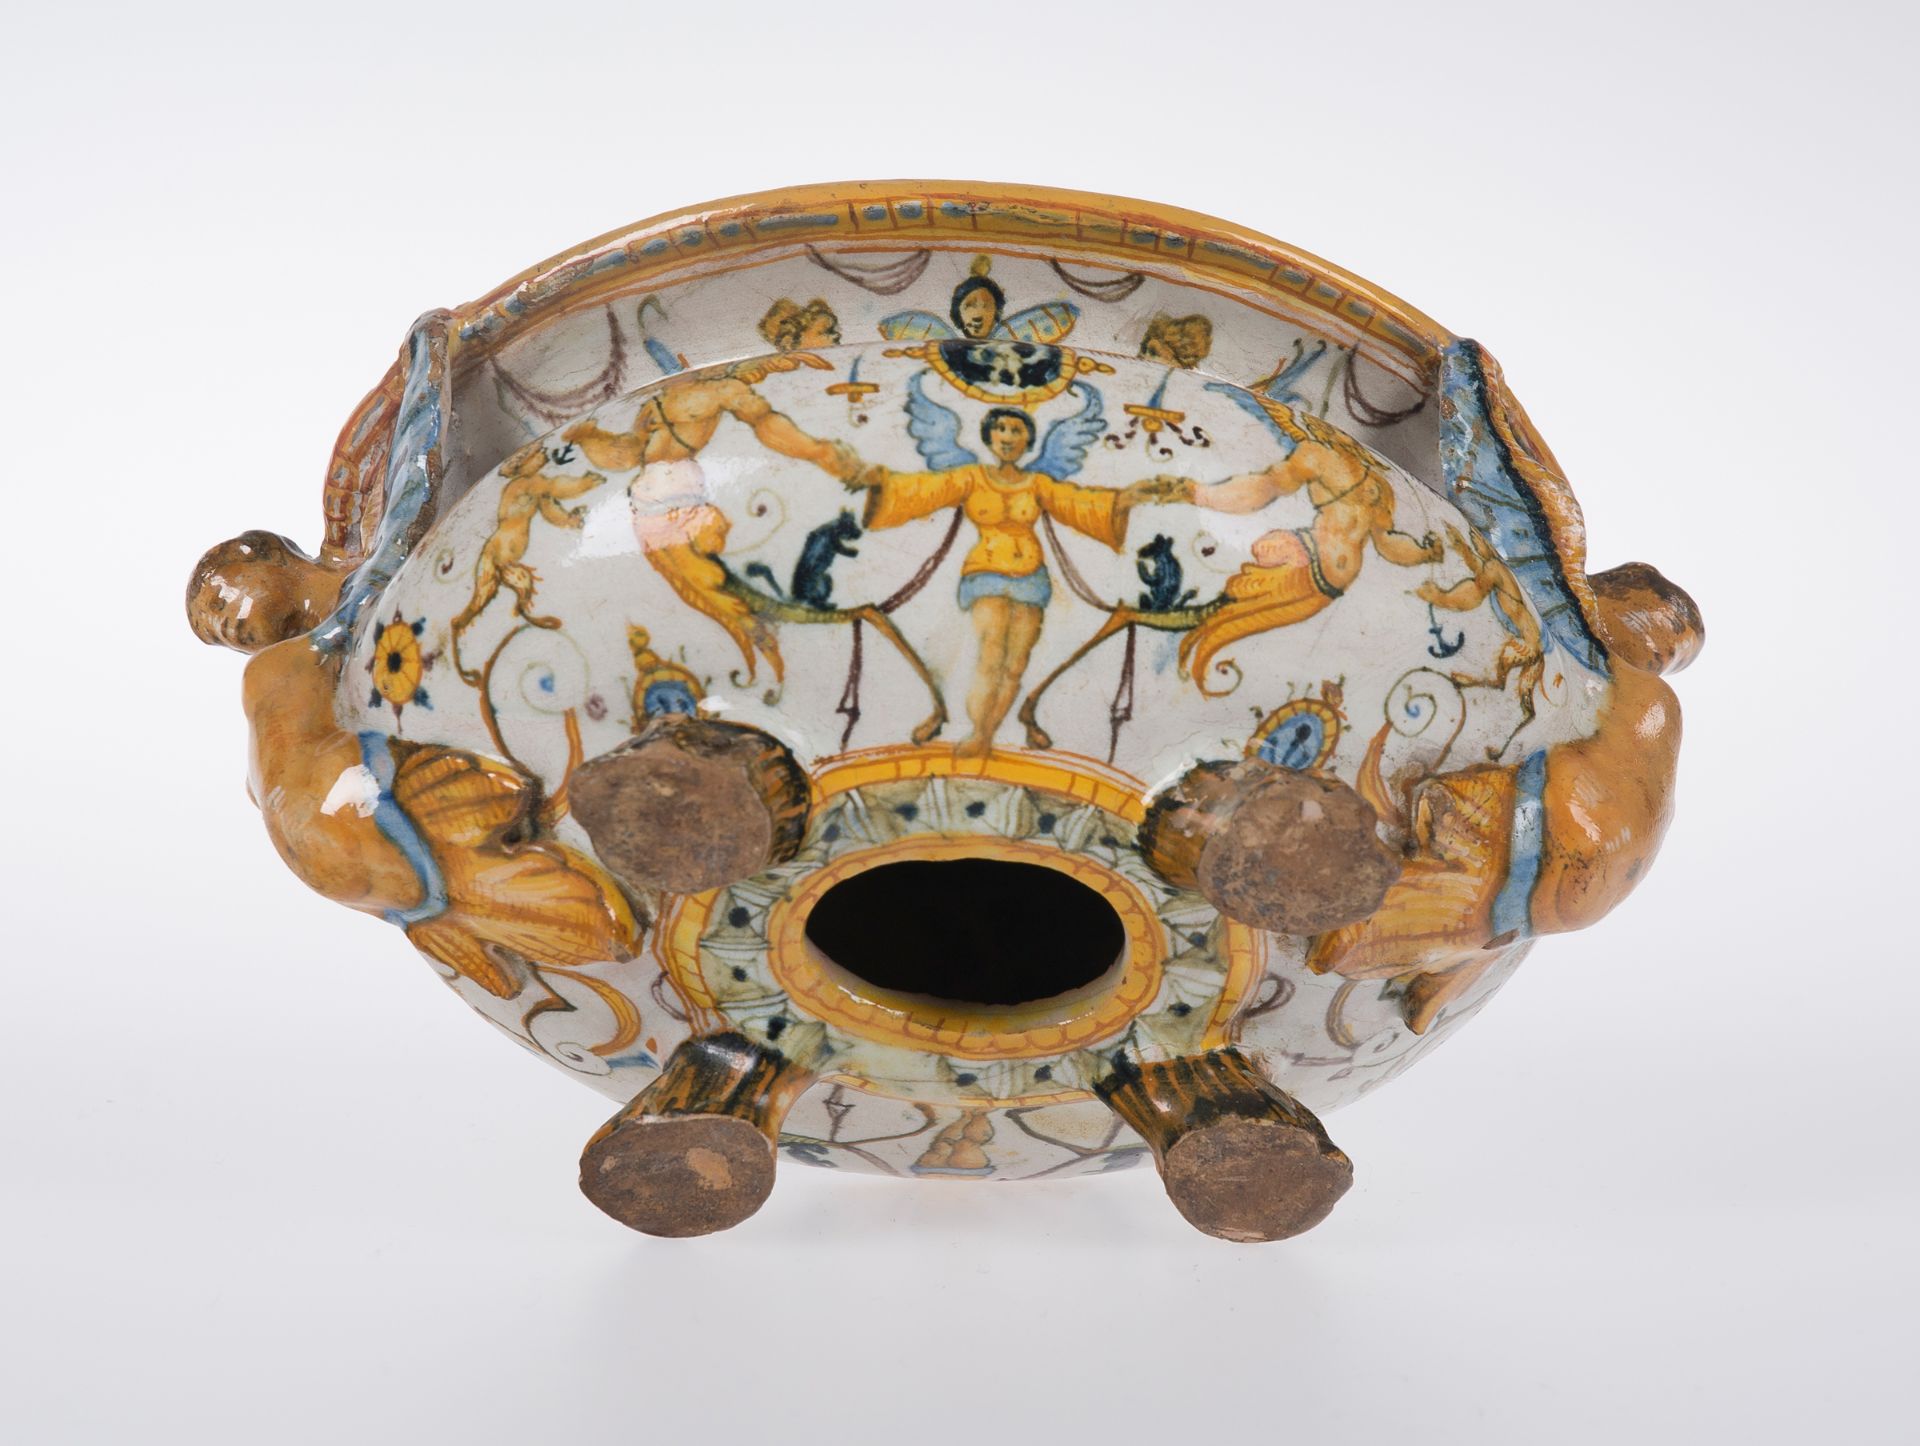 Ceramic salt shaker with decoration of grotesques. Urbino. Italy. Possibly by Orazio Fontana or - Image 5 of 5